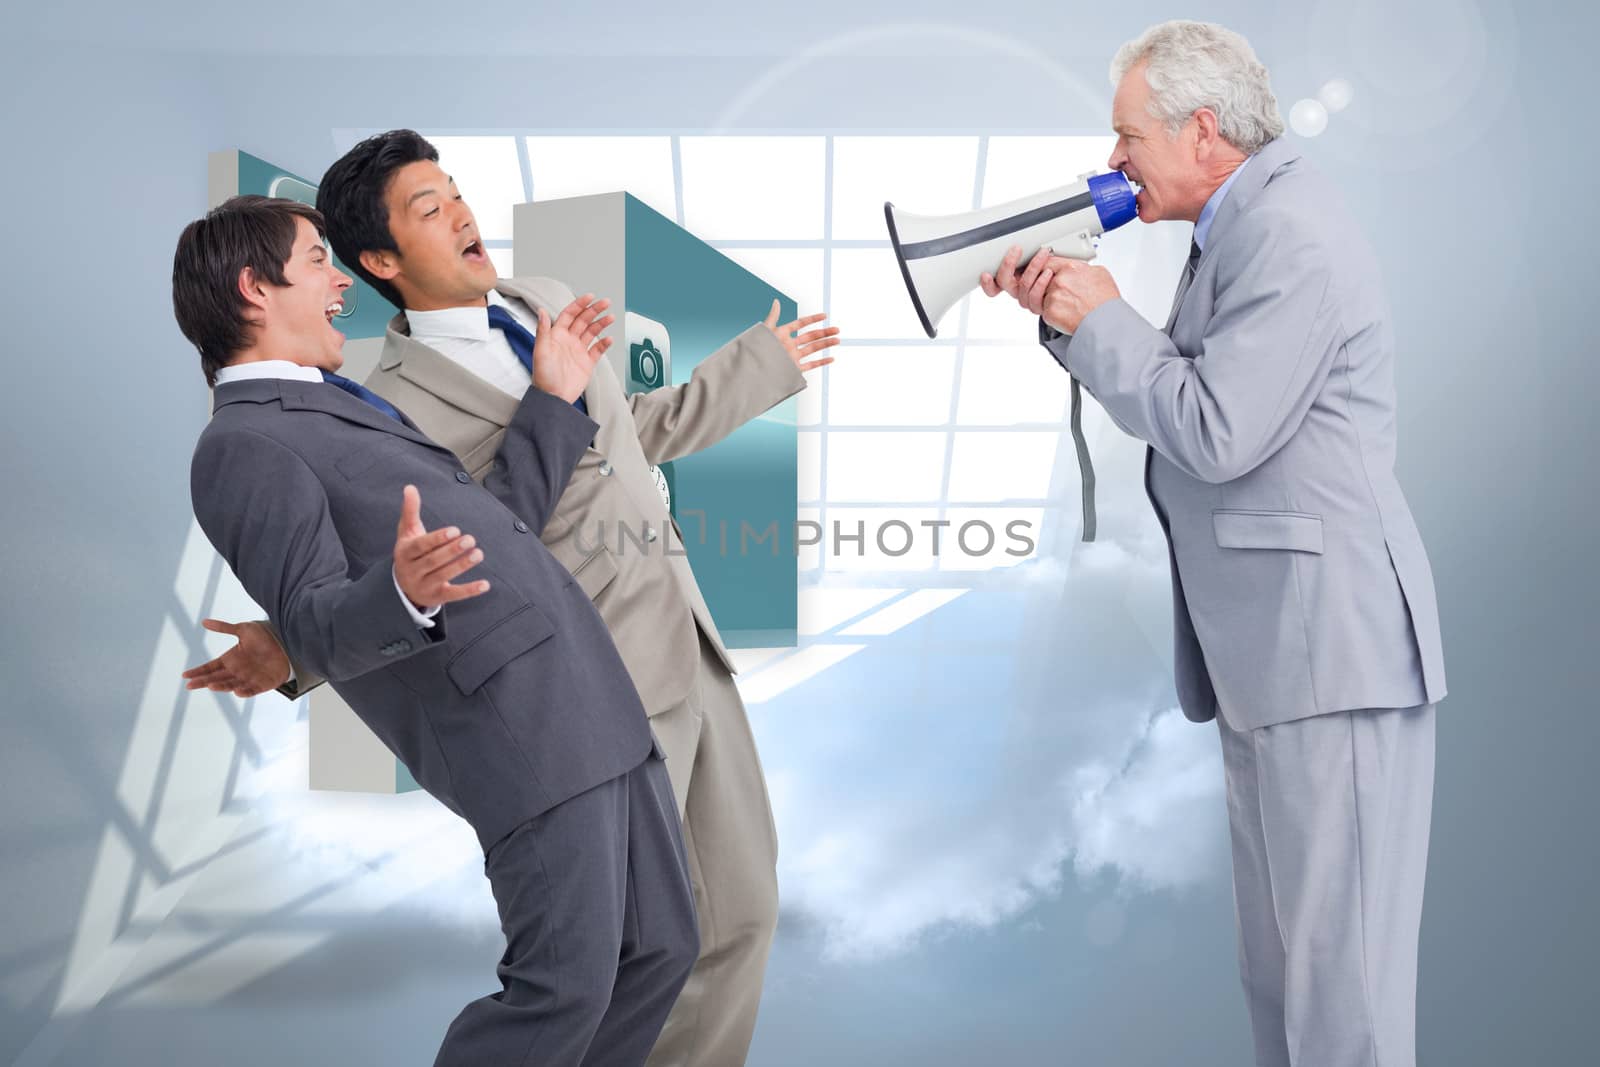 Senior salesman with megaphone yelling at his employees against room with holographic cloud